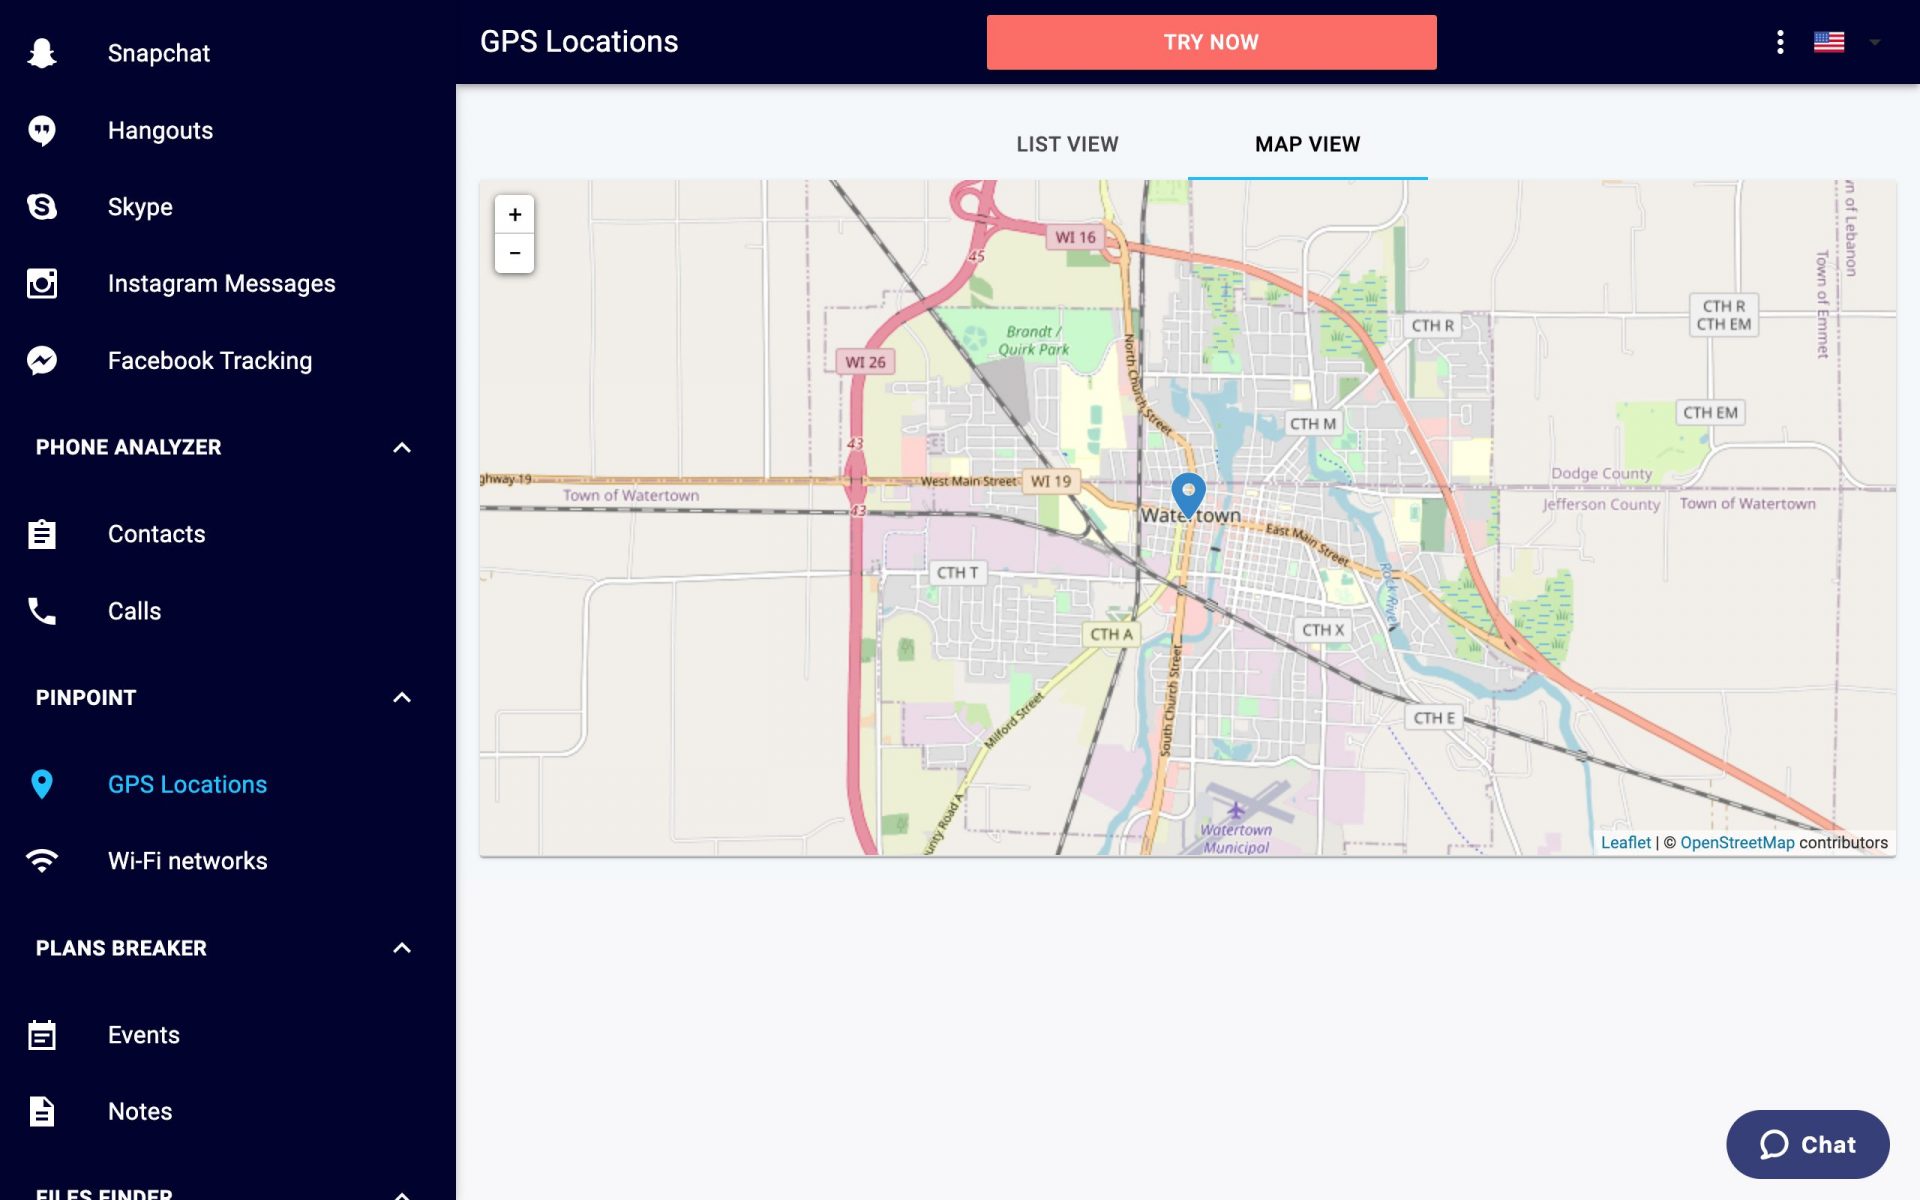 Eyezy GPS Locations - Map View